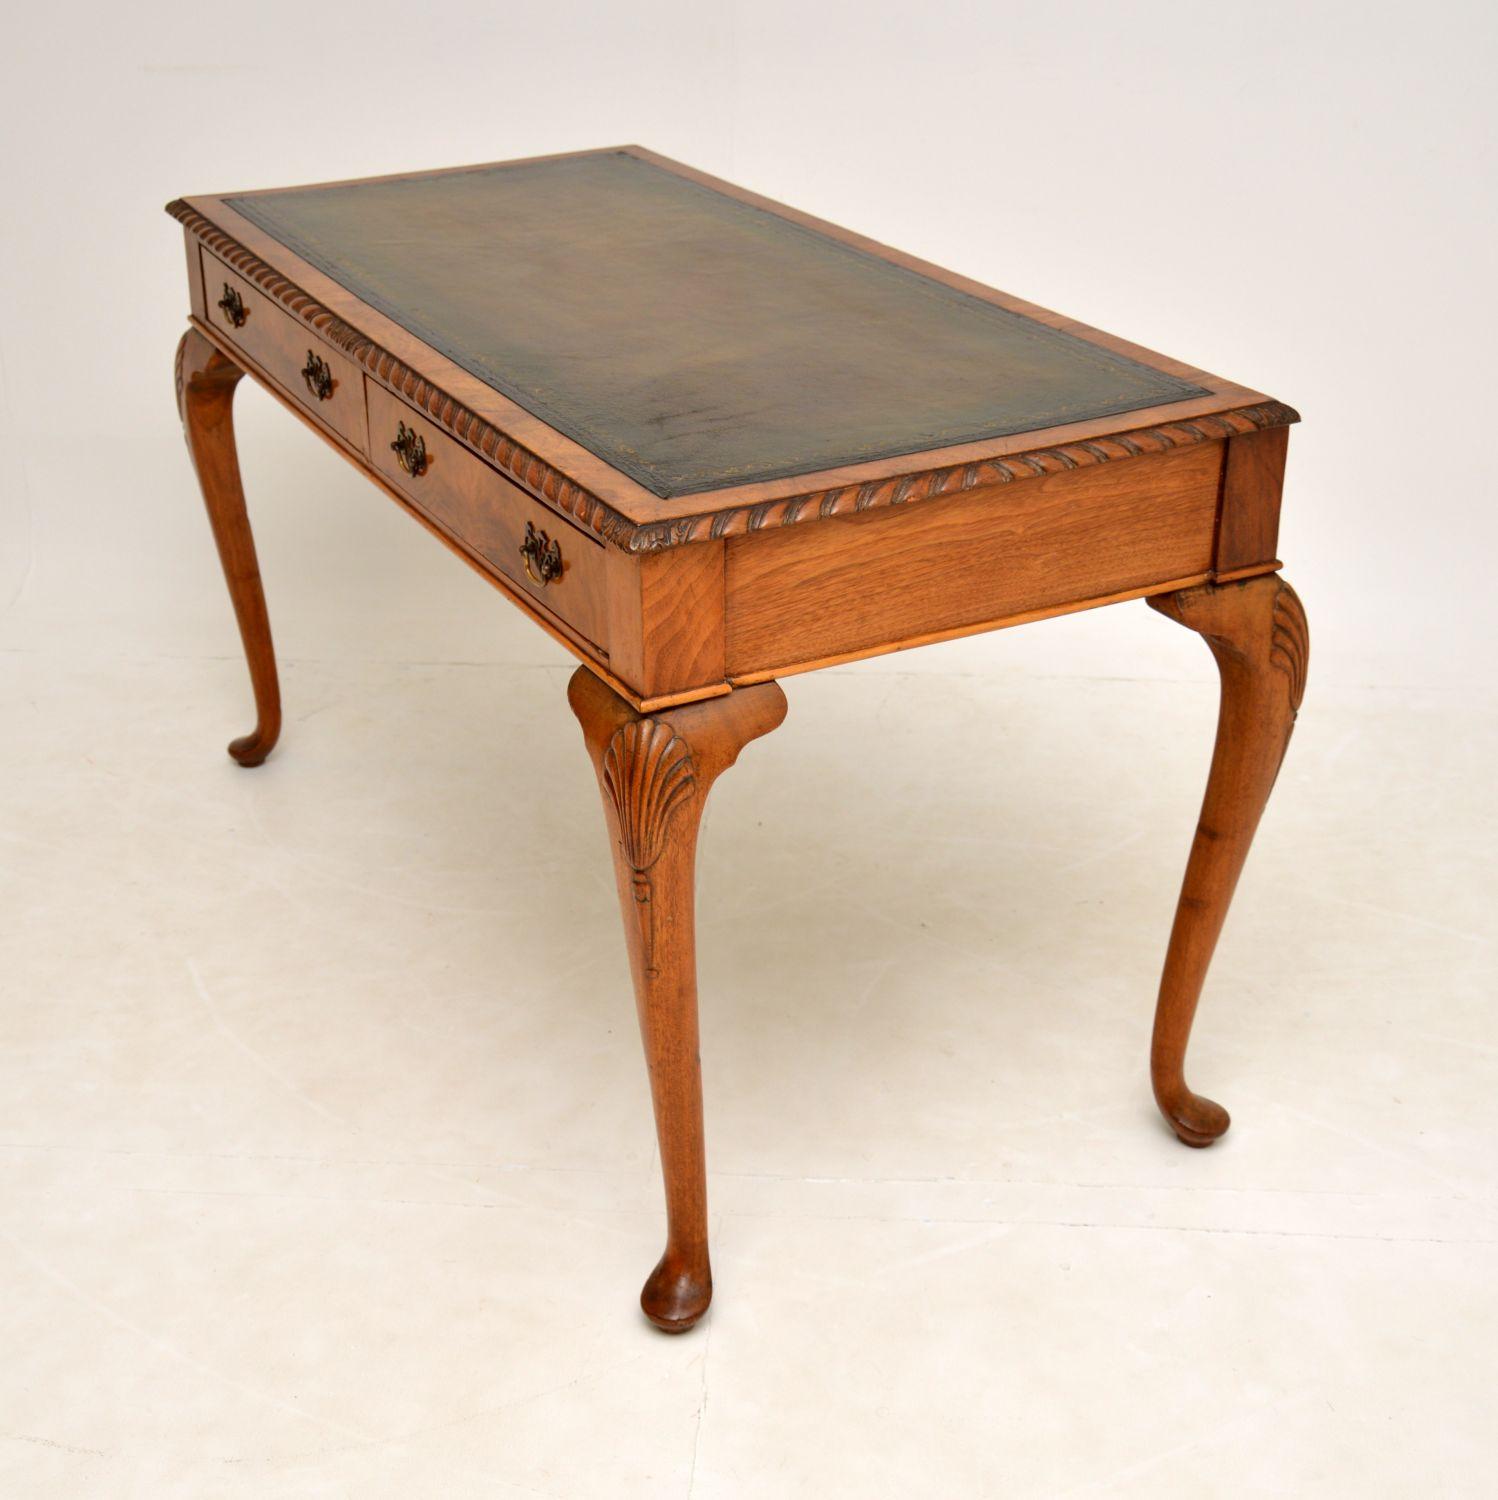 Chippendale Antique Walnut Leather Top Writing Table / Desk